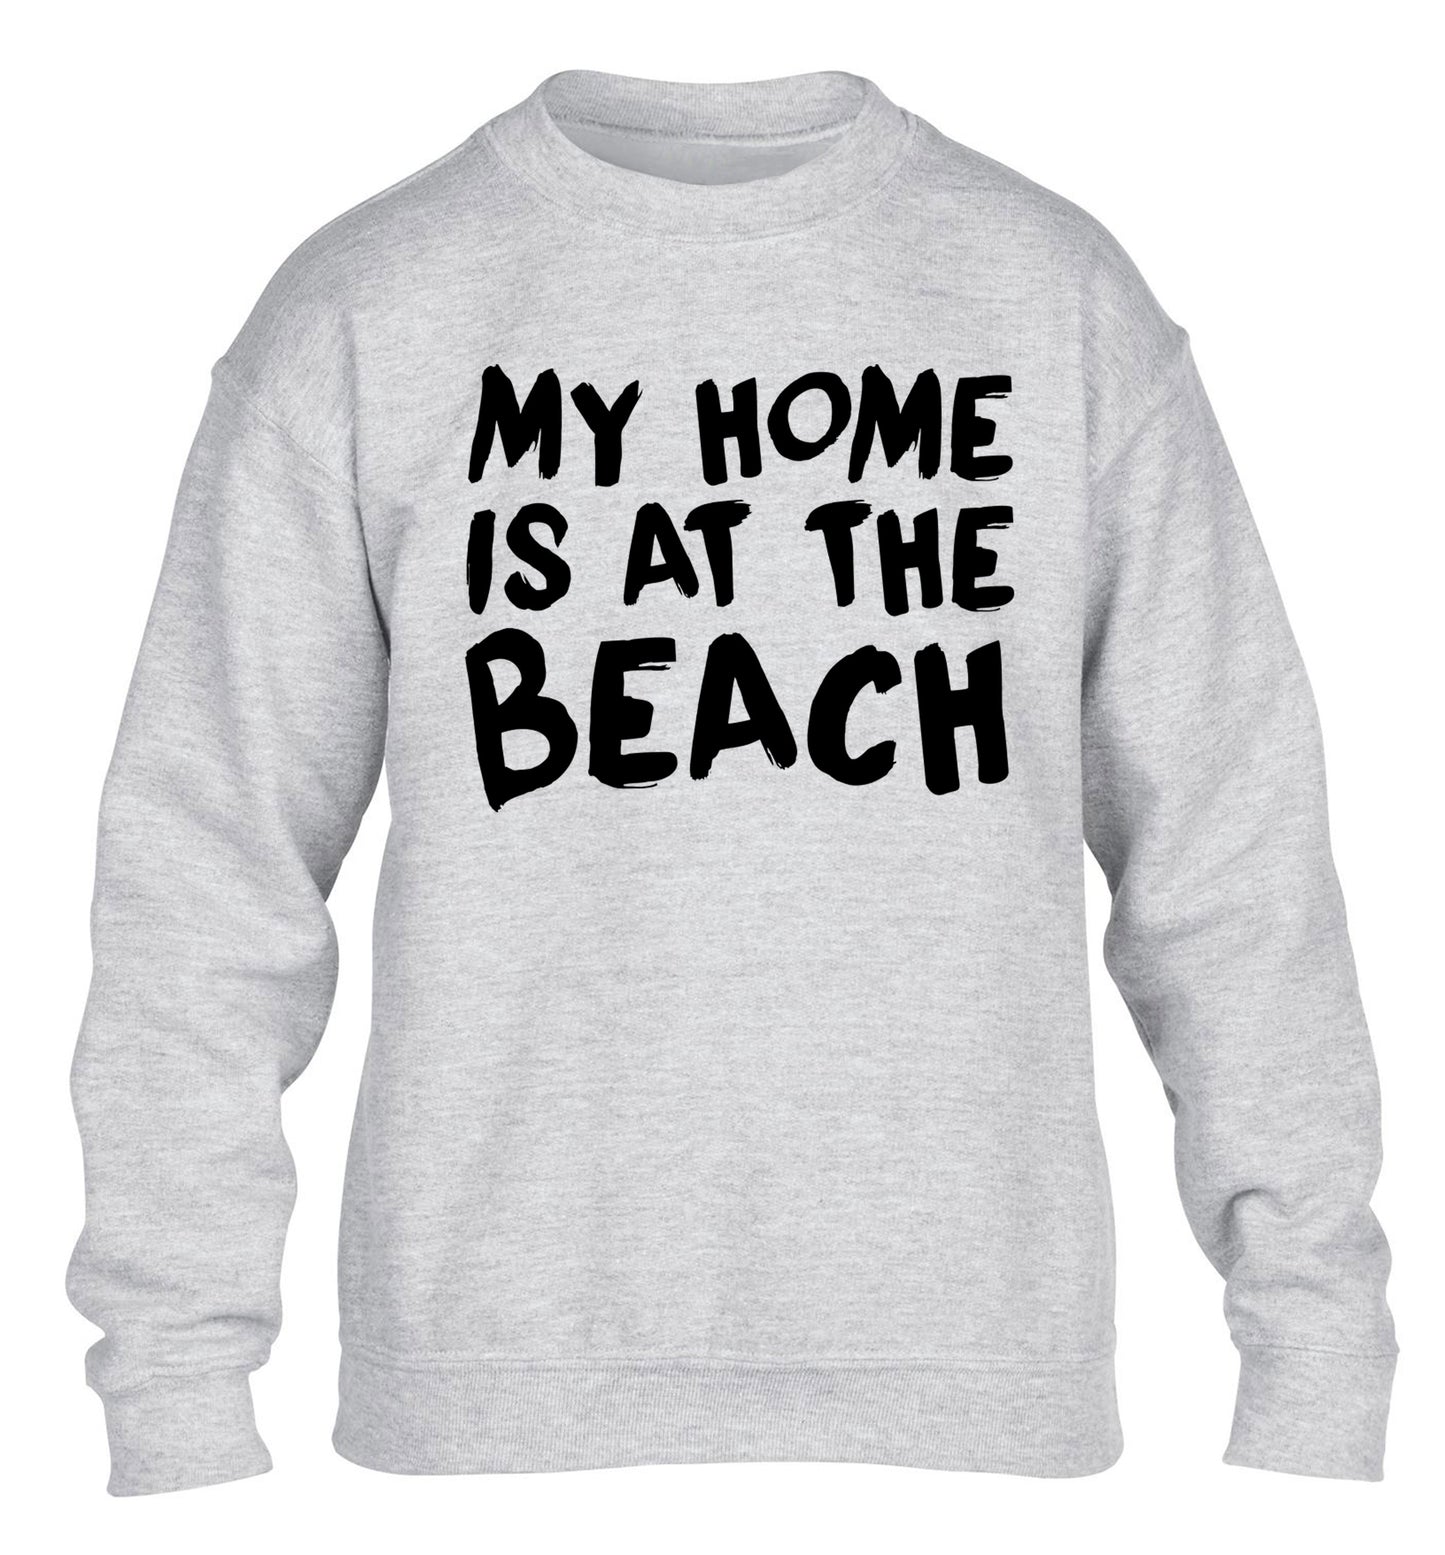 My home is at the beach children's grey sweater 12-14 Years